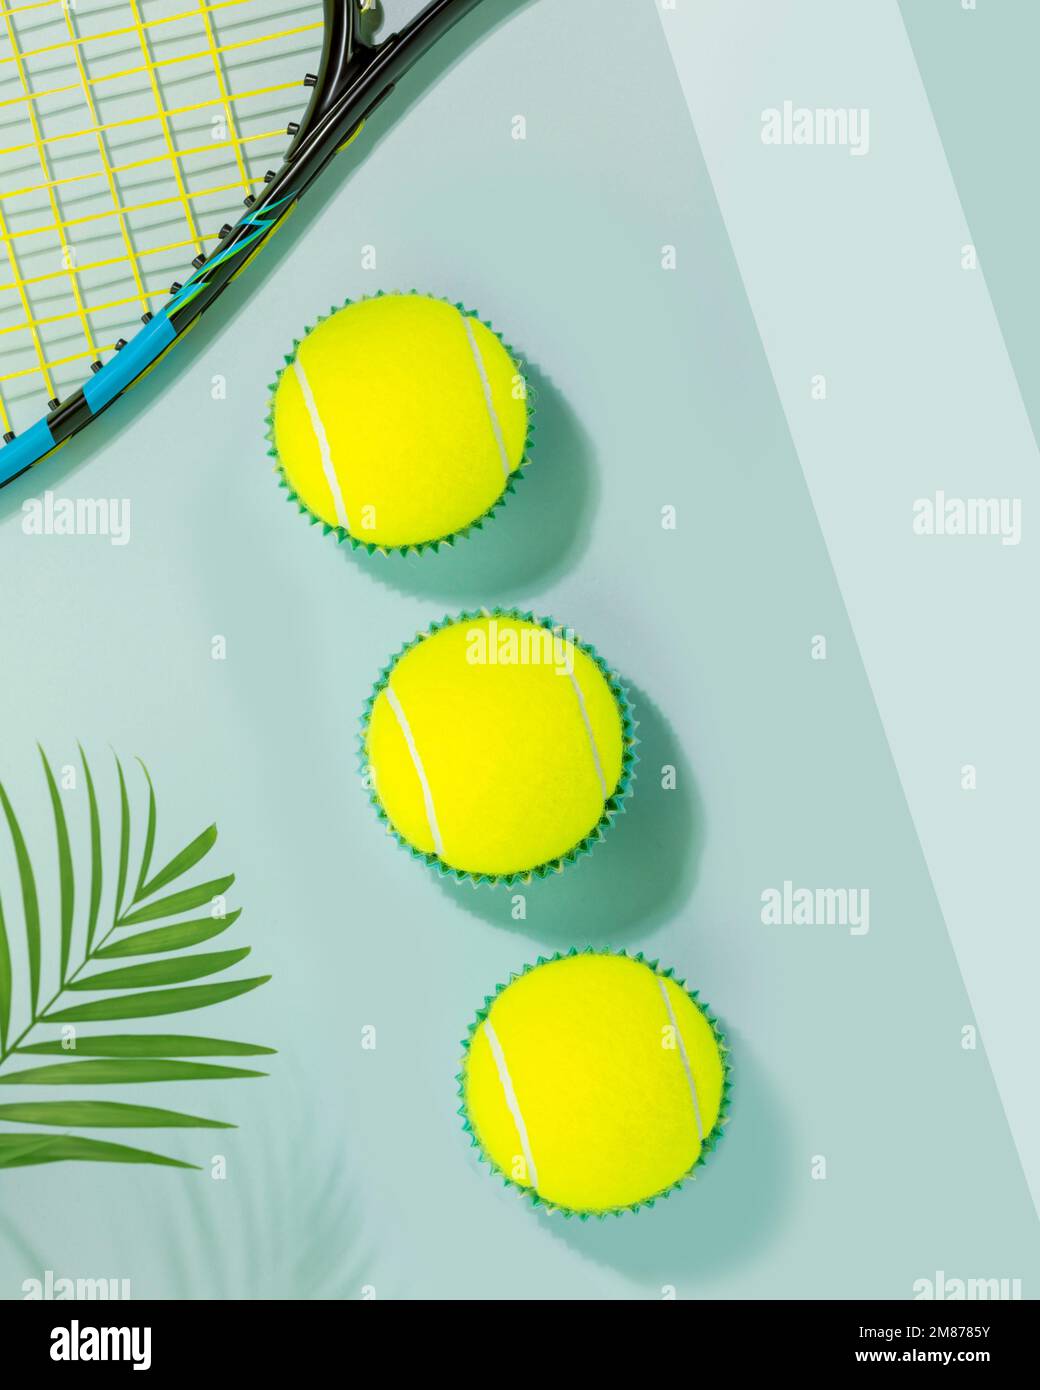 Tennis competition card. Sport composition with yellow tennis balls and tennis racket on a blue court background with palm leaves and shadows. Sport a Stock Photo